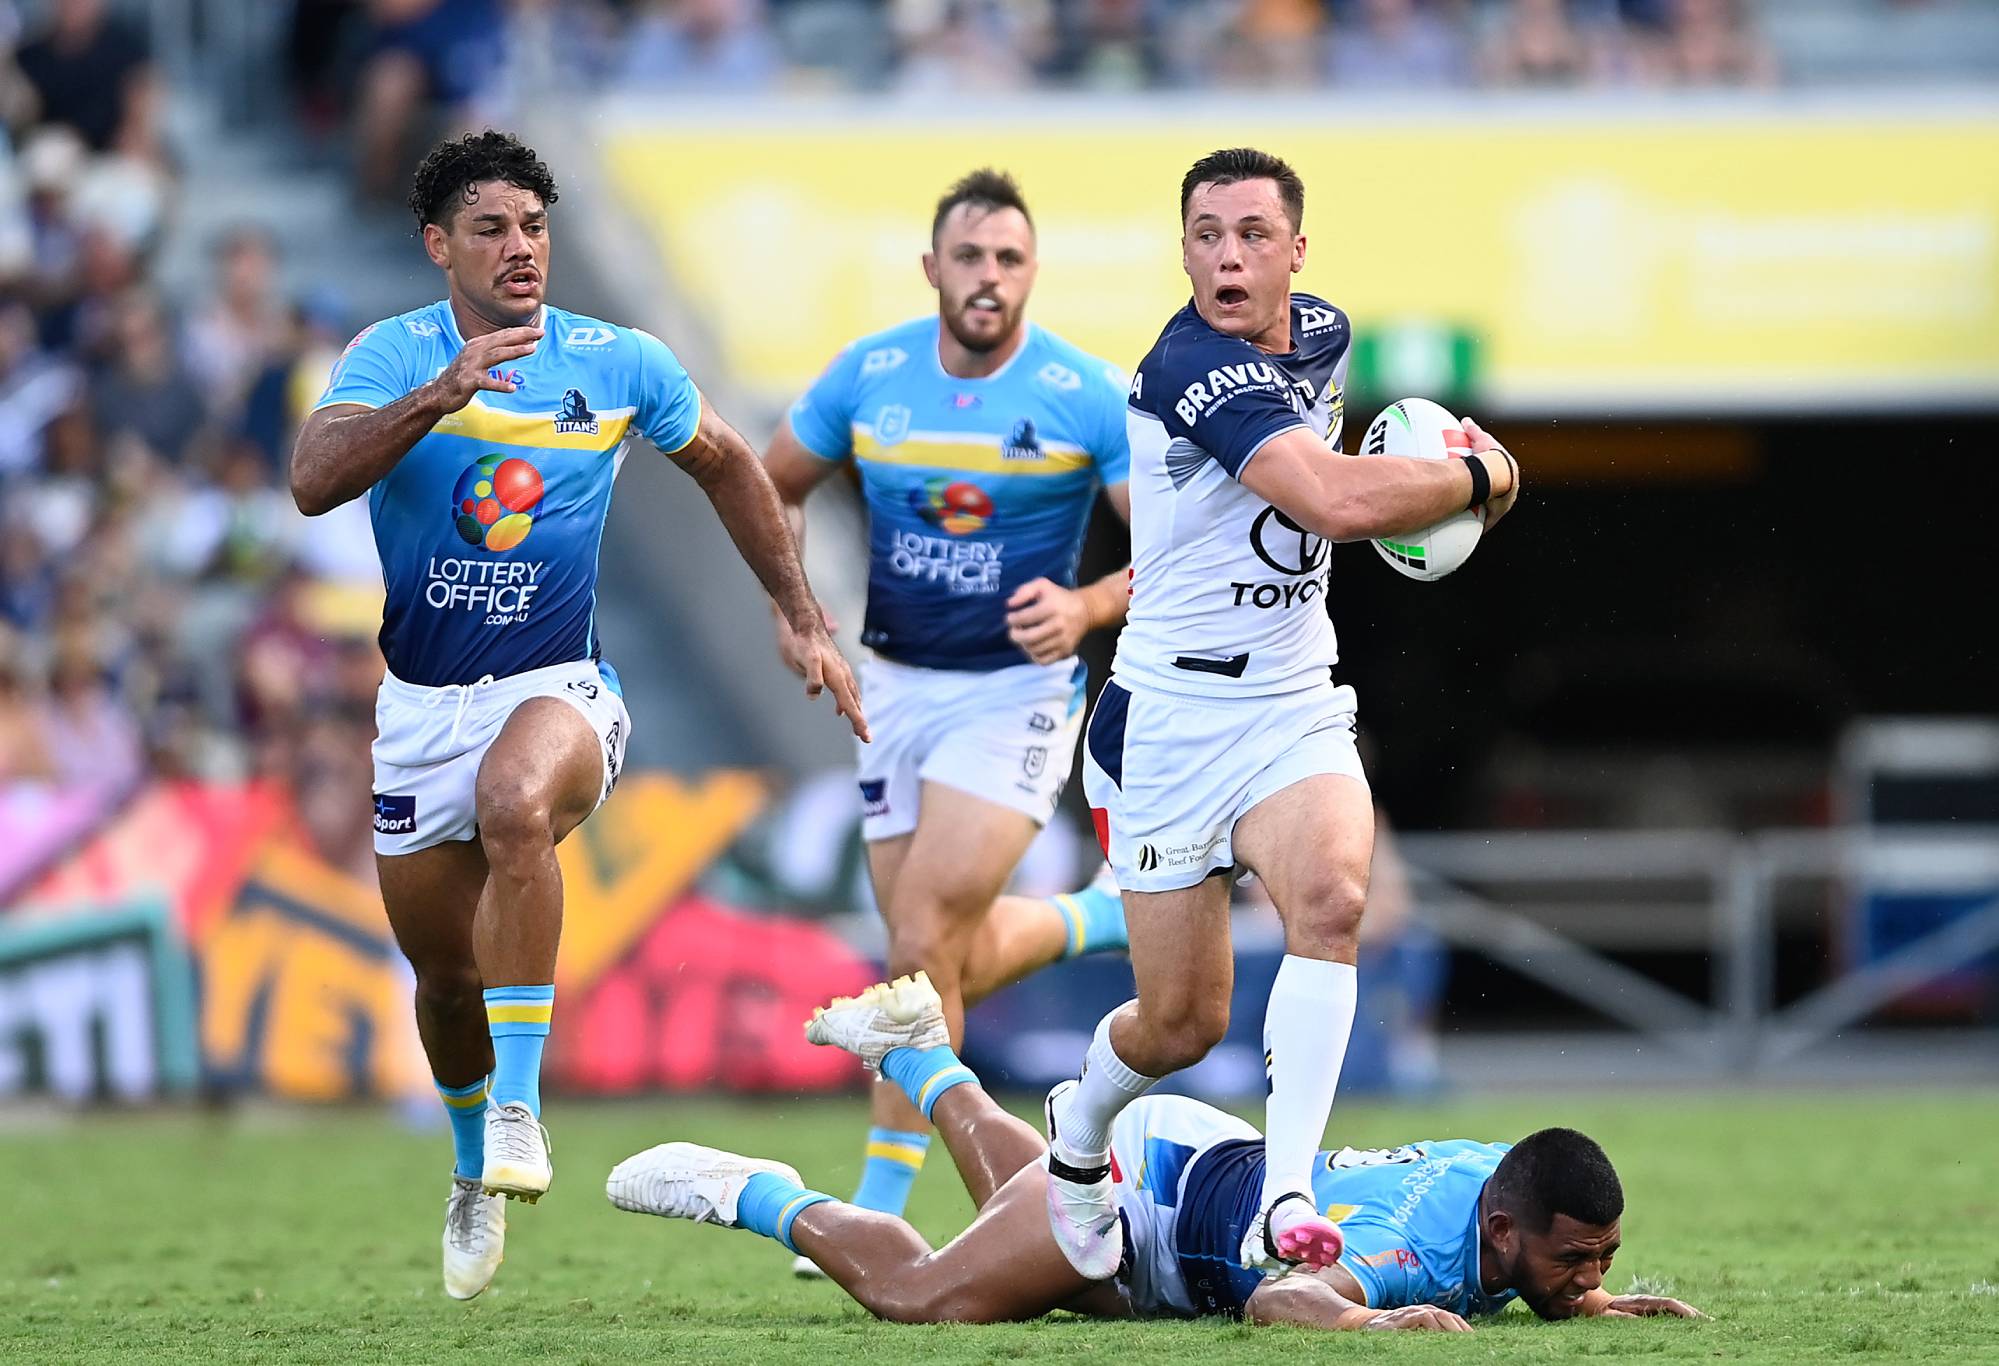 TOWNSVILLE, AUSTRALIA - APRIL 07: Scott Drinkwater of the Cowboys makes a breakduring the round five NRL match between North Queensland Cowboys and Gold Coast Titans at Qld Country Bank Stadium, on April 07, 2024, in Townsville, Australia. (Photo by Ian Hitchcock/Getty Images)